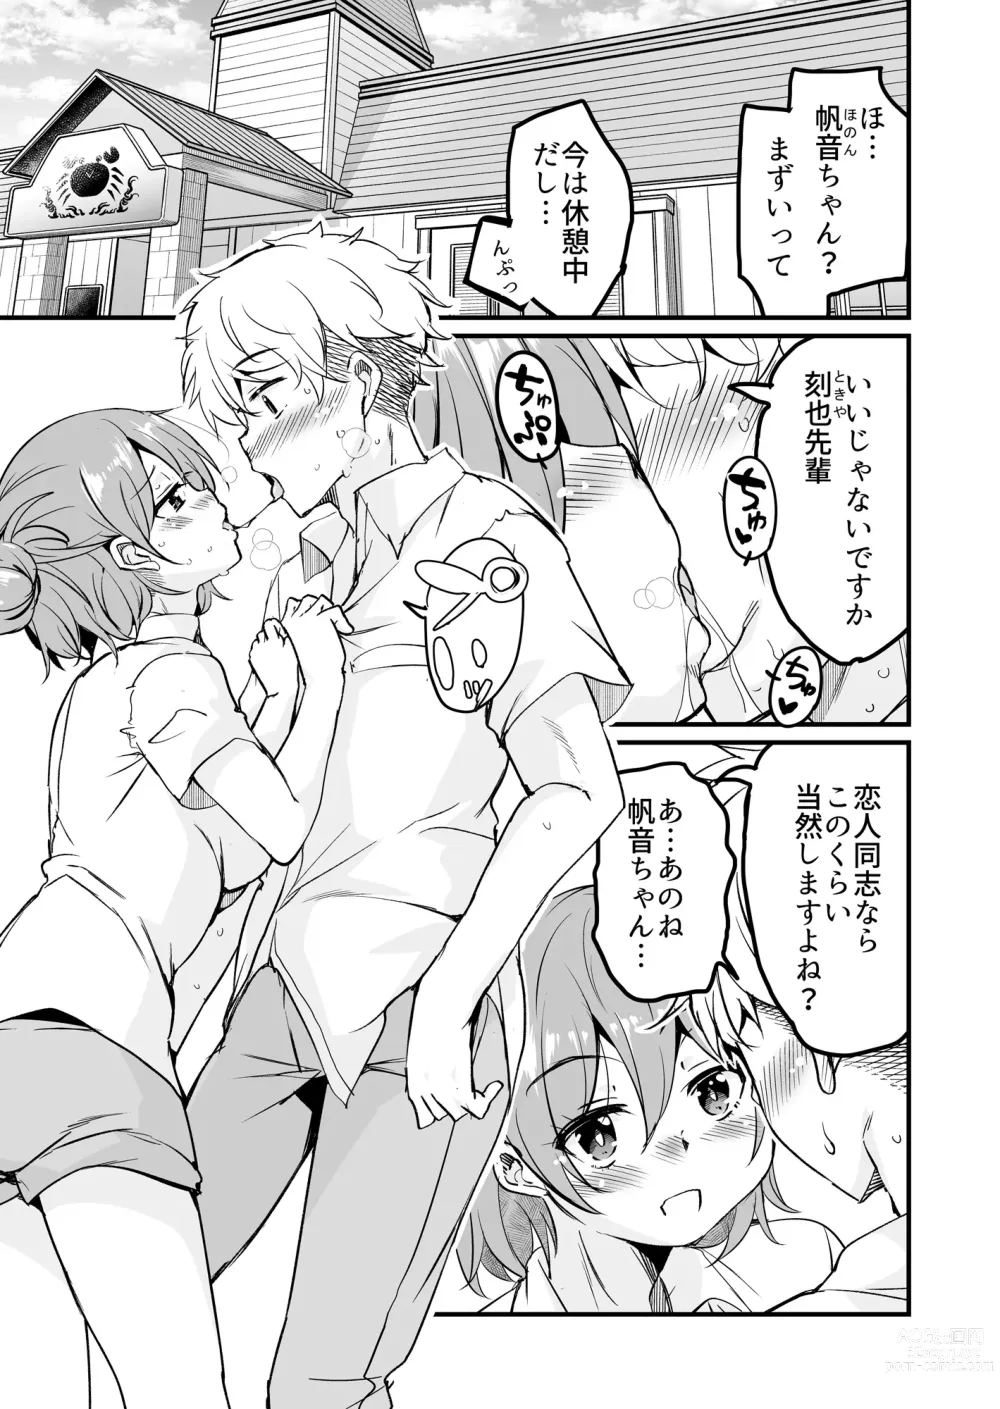 Page 5 of doujinshi 人妻店長〜娘の彼氏お借りします〜